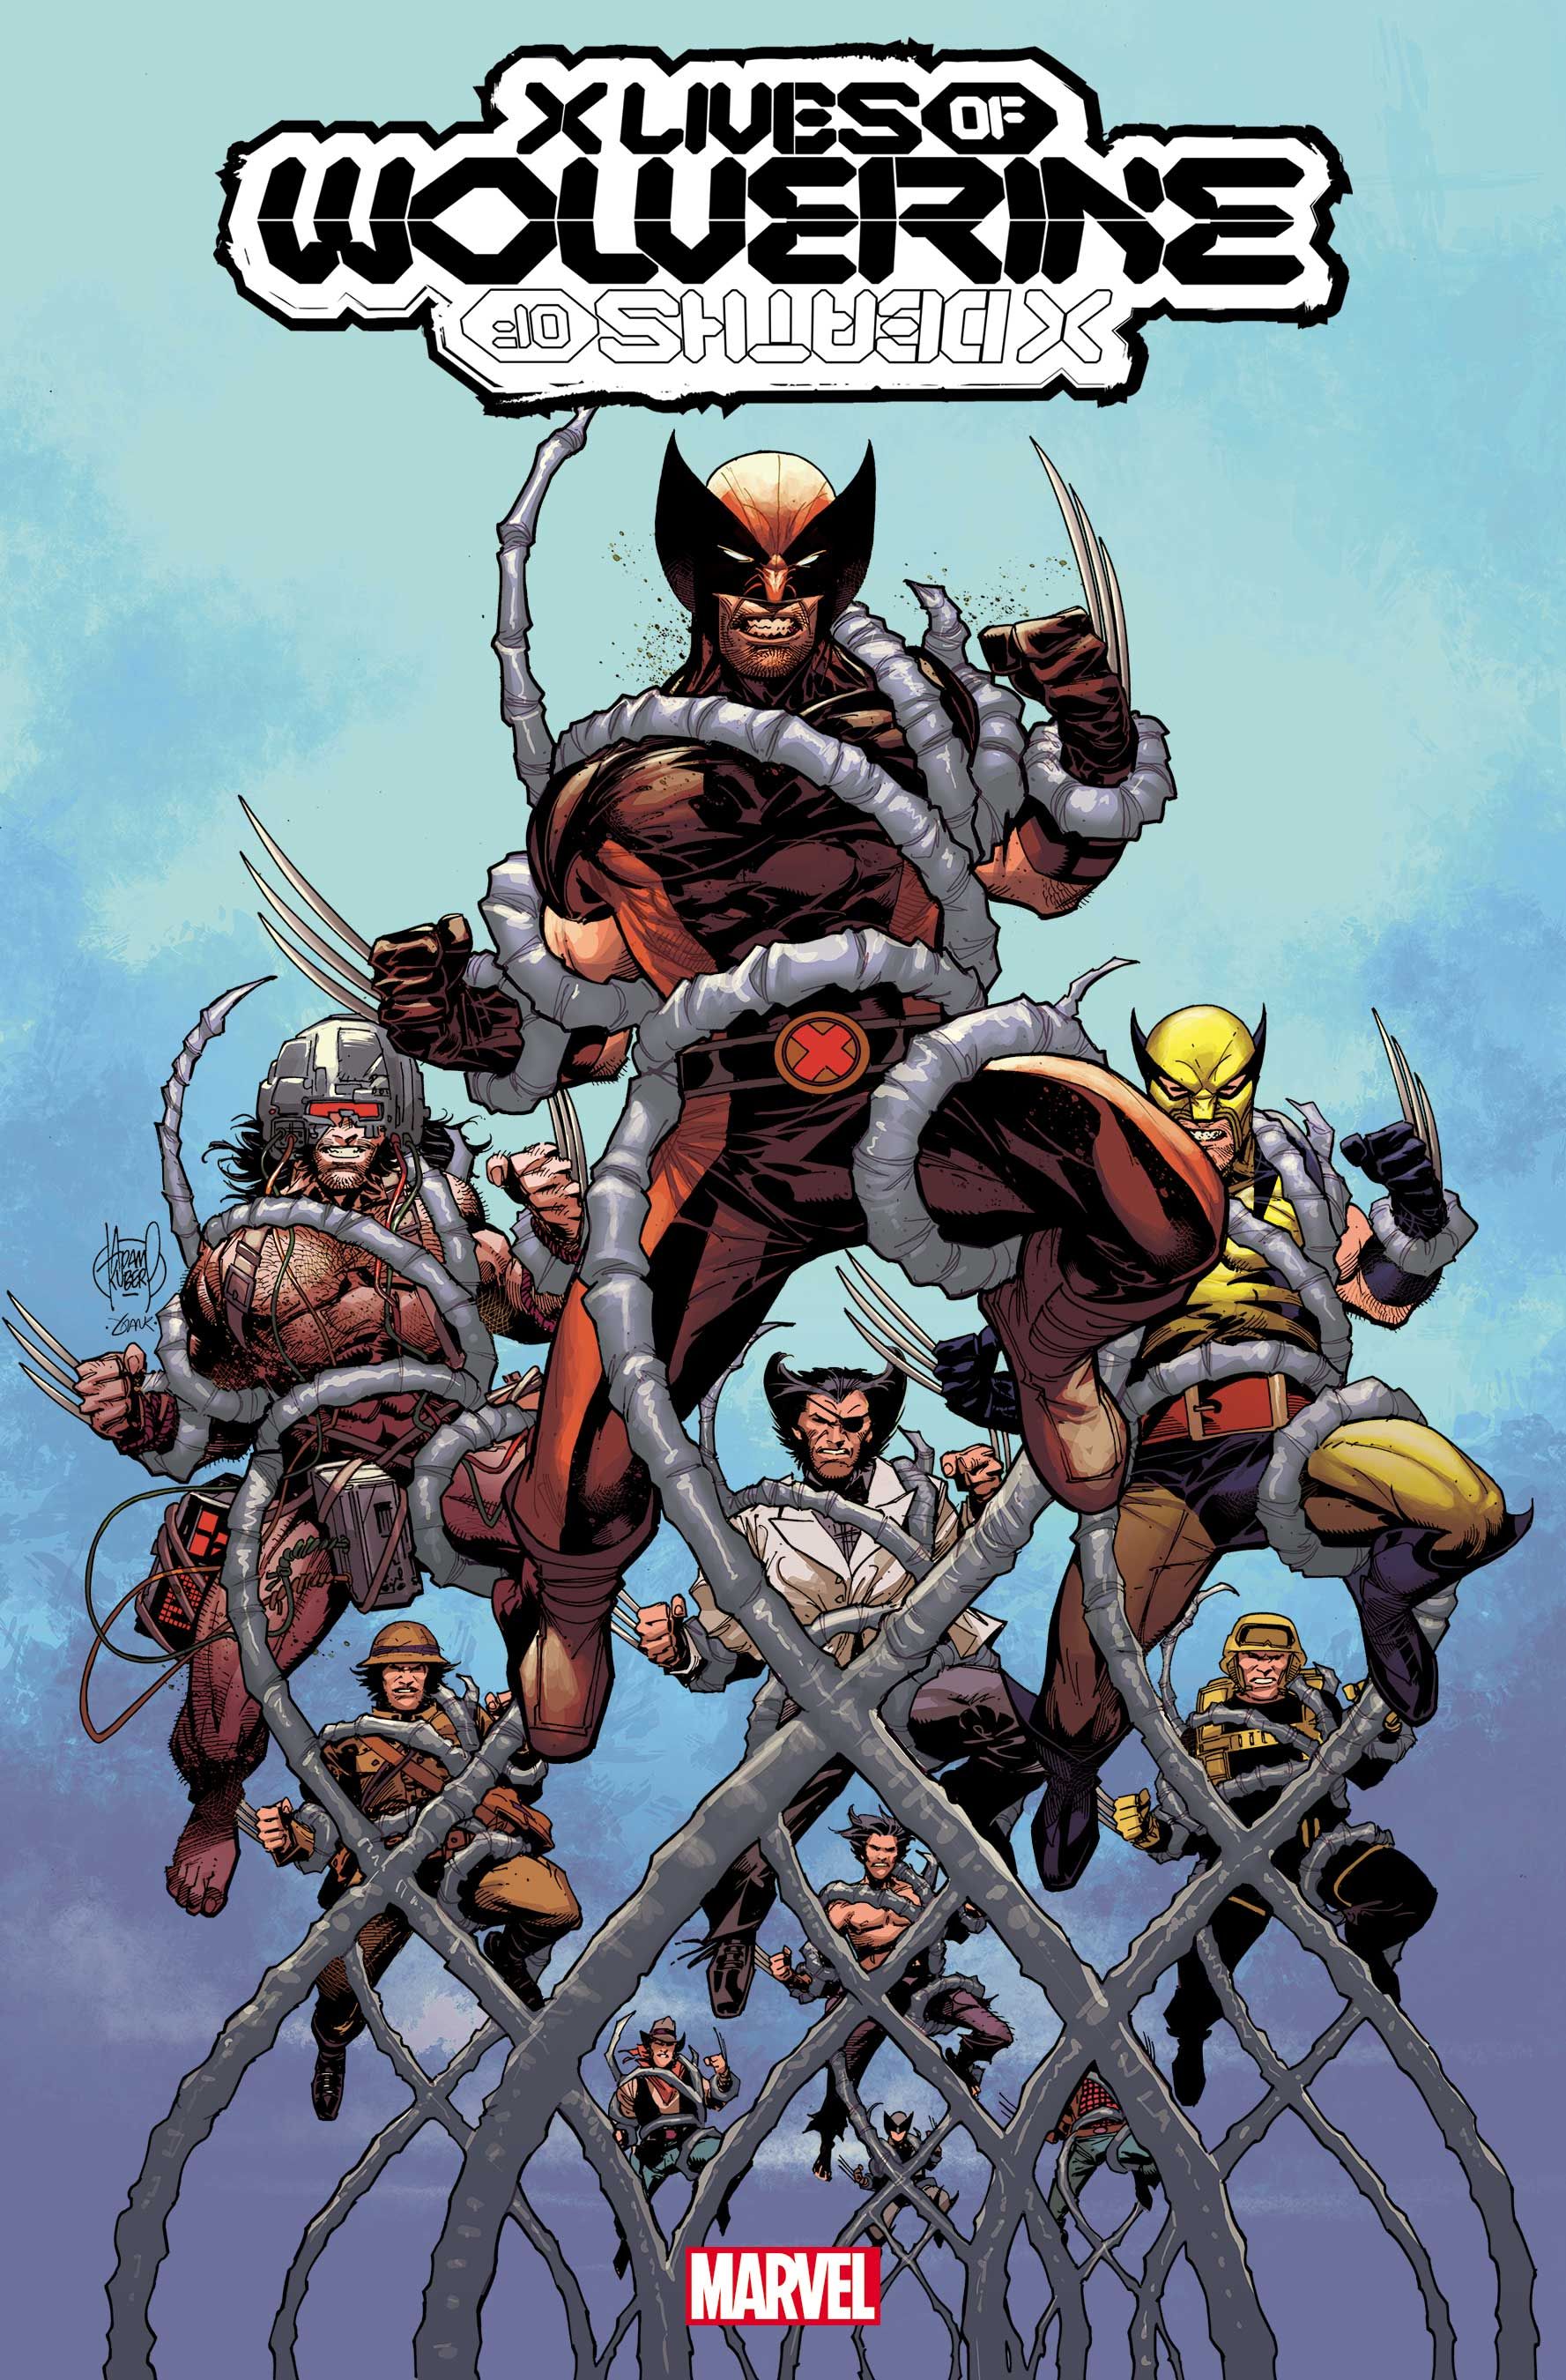 Various iterations of Logan on the cover of X Lives of Wolverine 1 by Adam Kubert